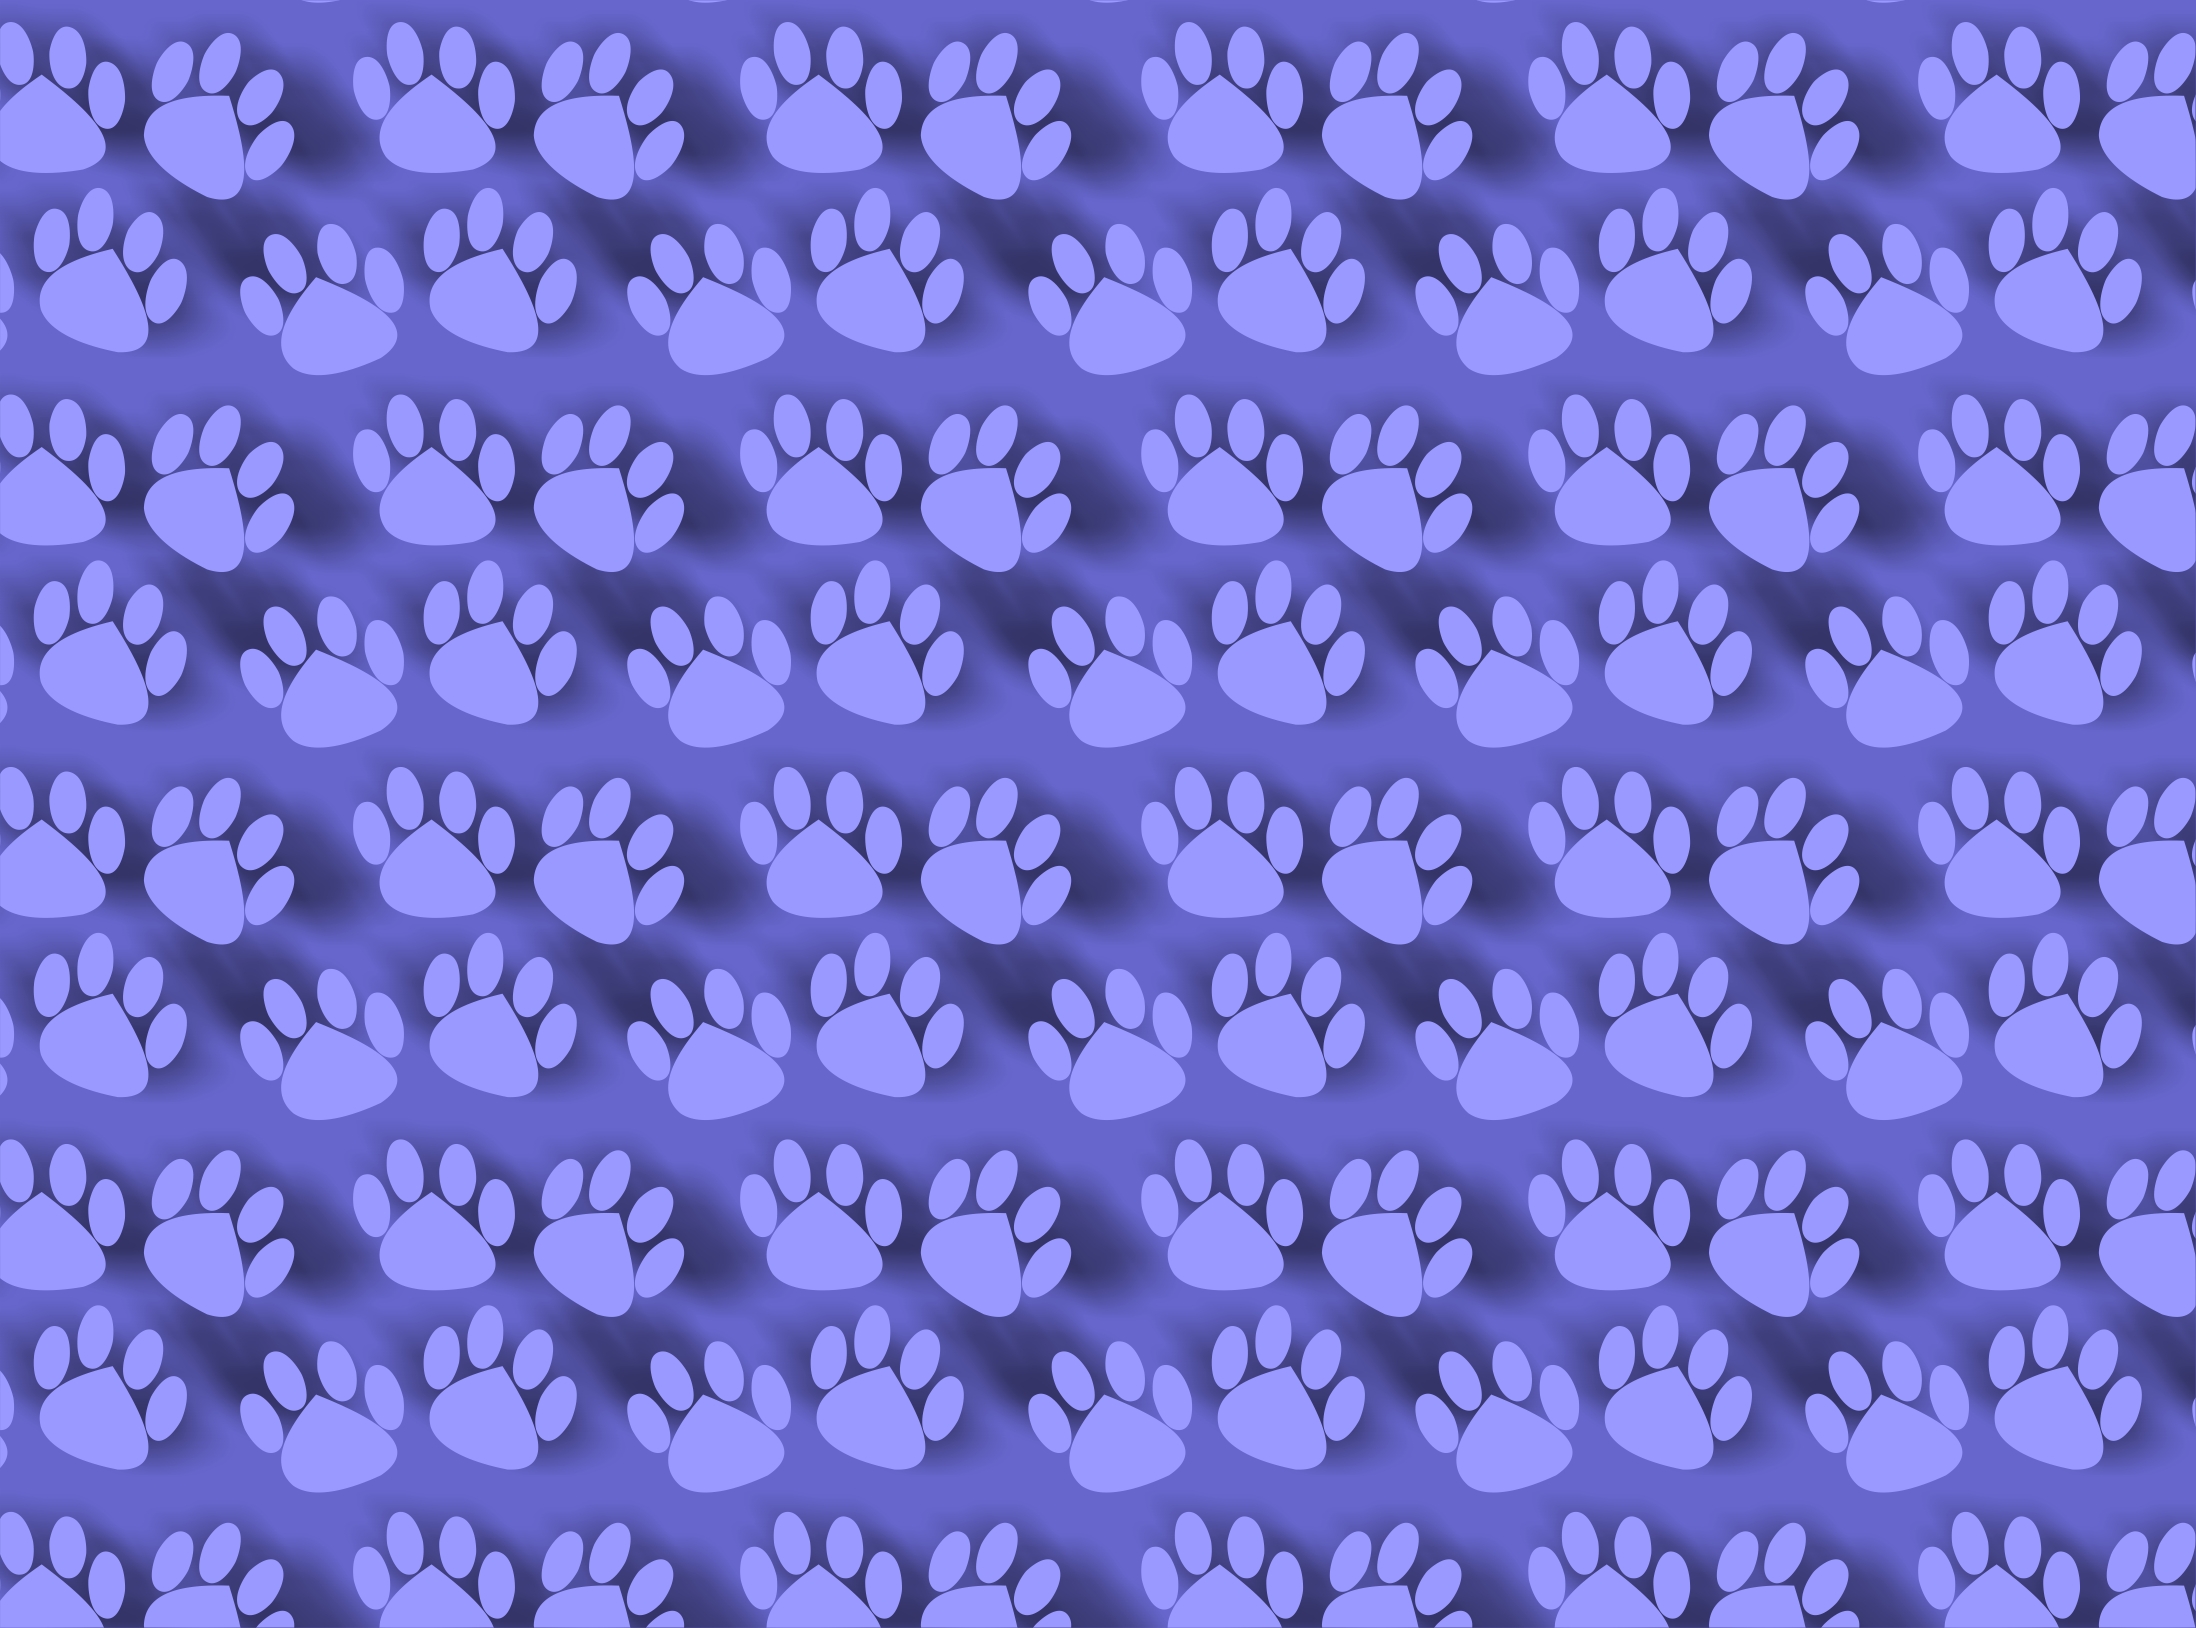 51231 Screensavers and Wallpapers Paws for phone. Download pictures, texture, textures, traces, paws pictures for free